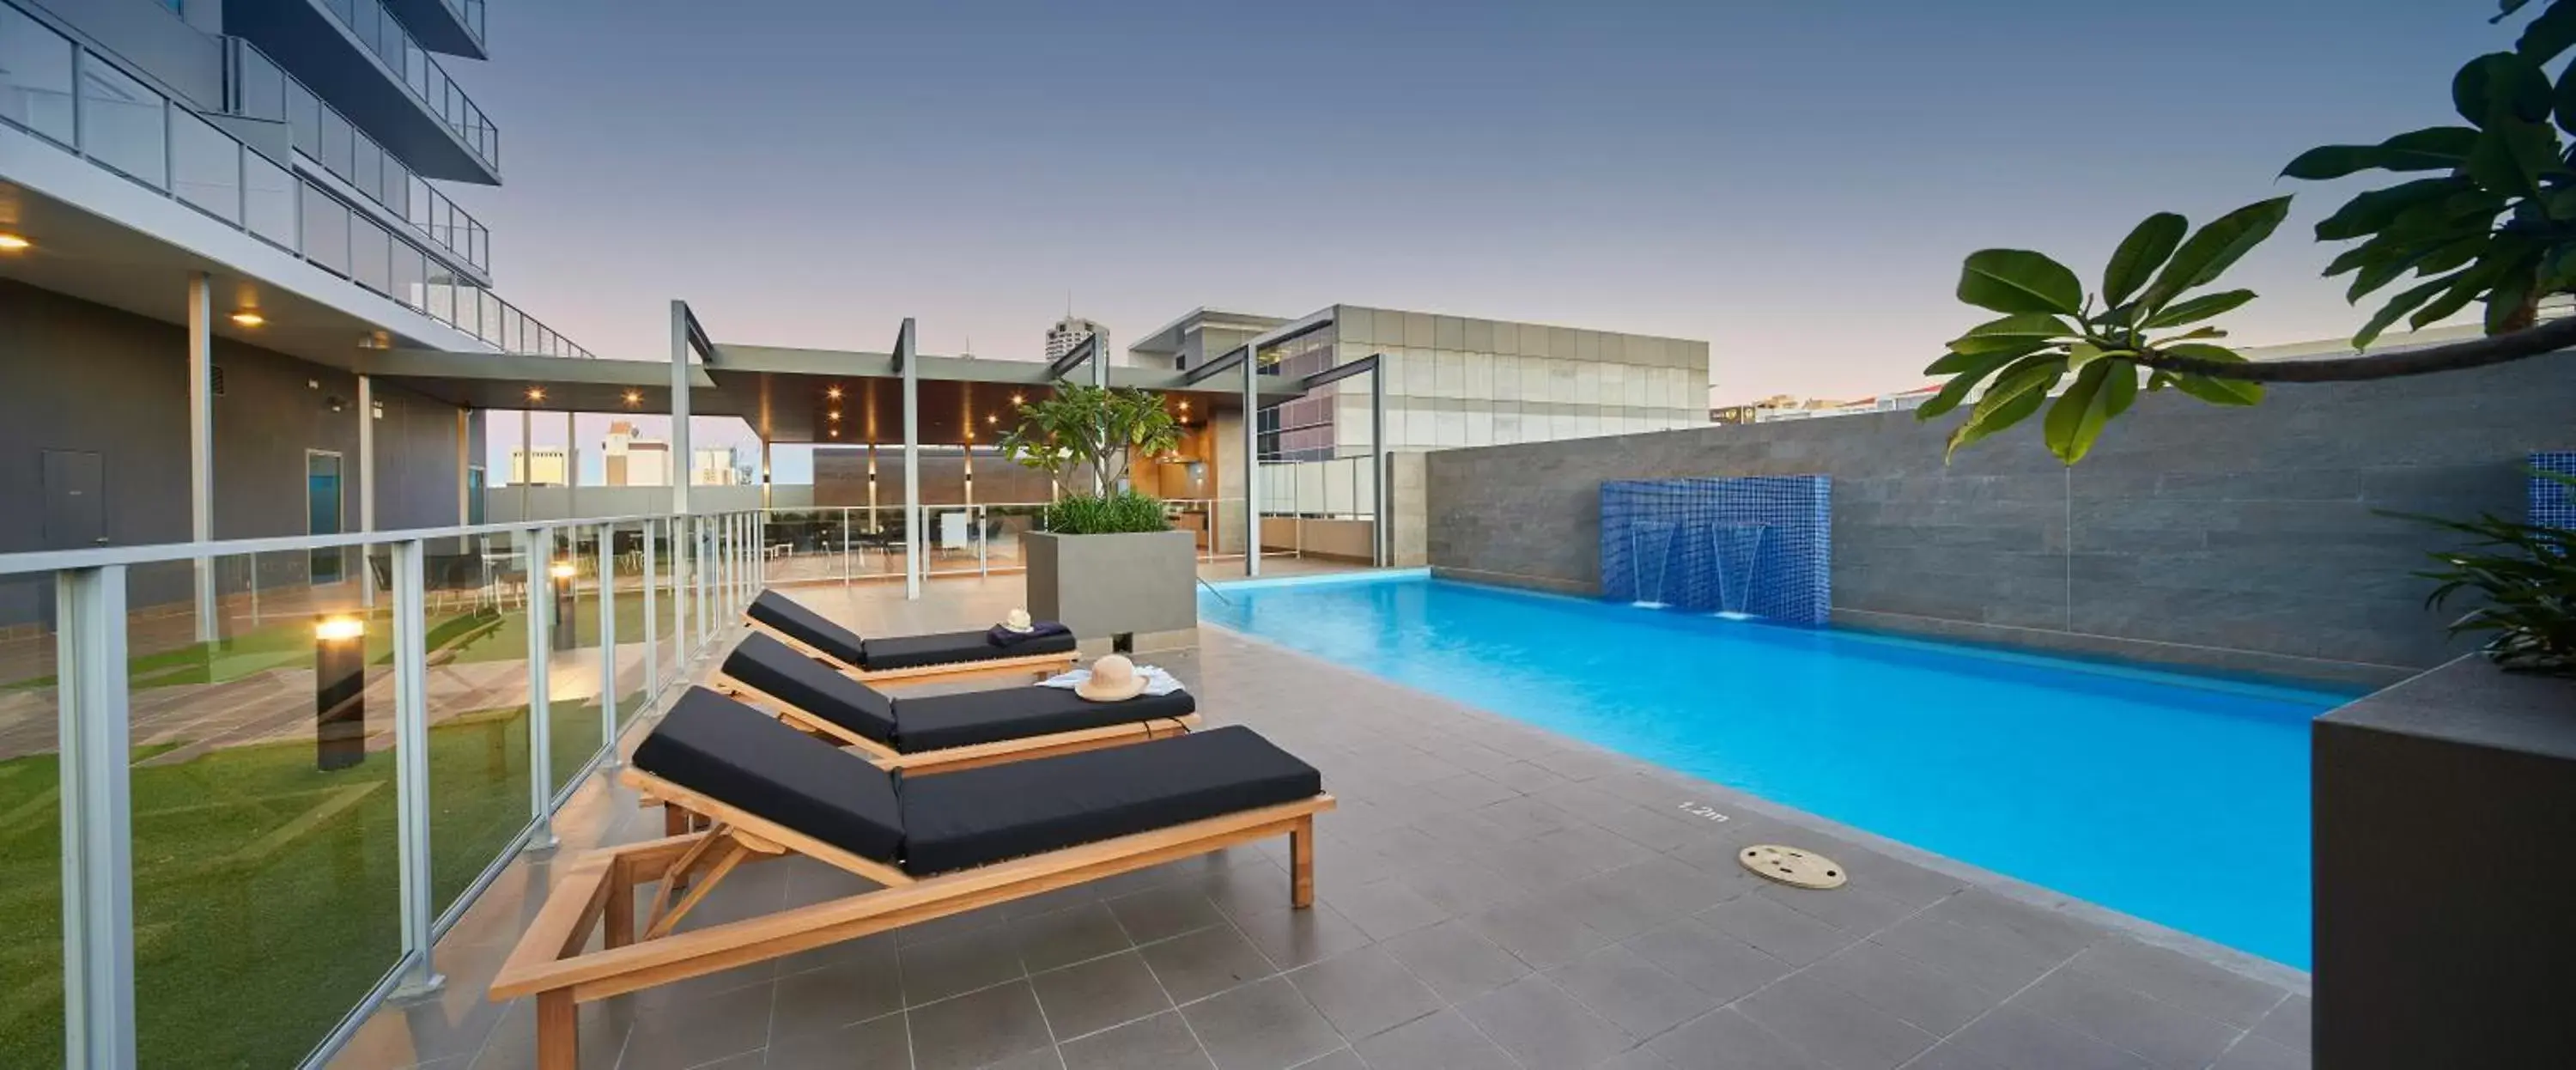 Property building, Swimming Pool in The Sebel West Perth